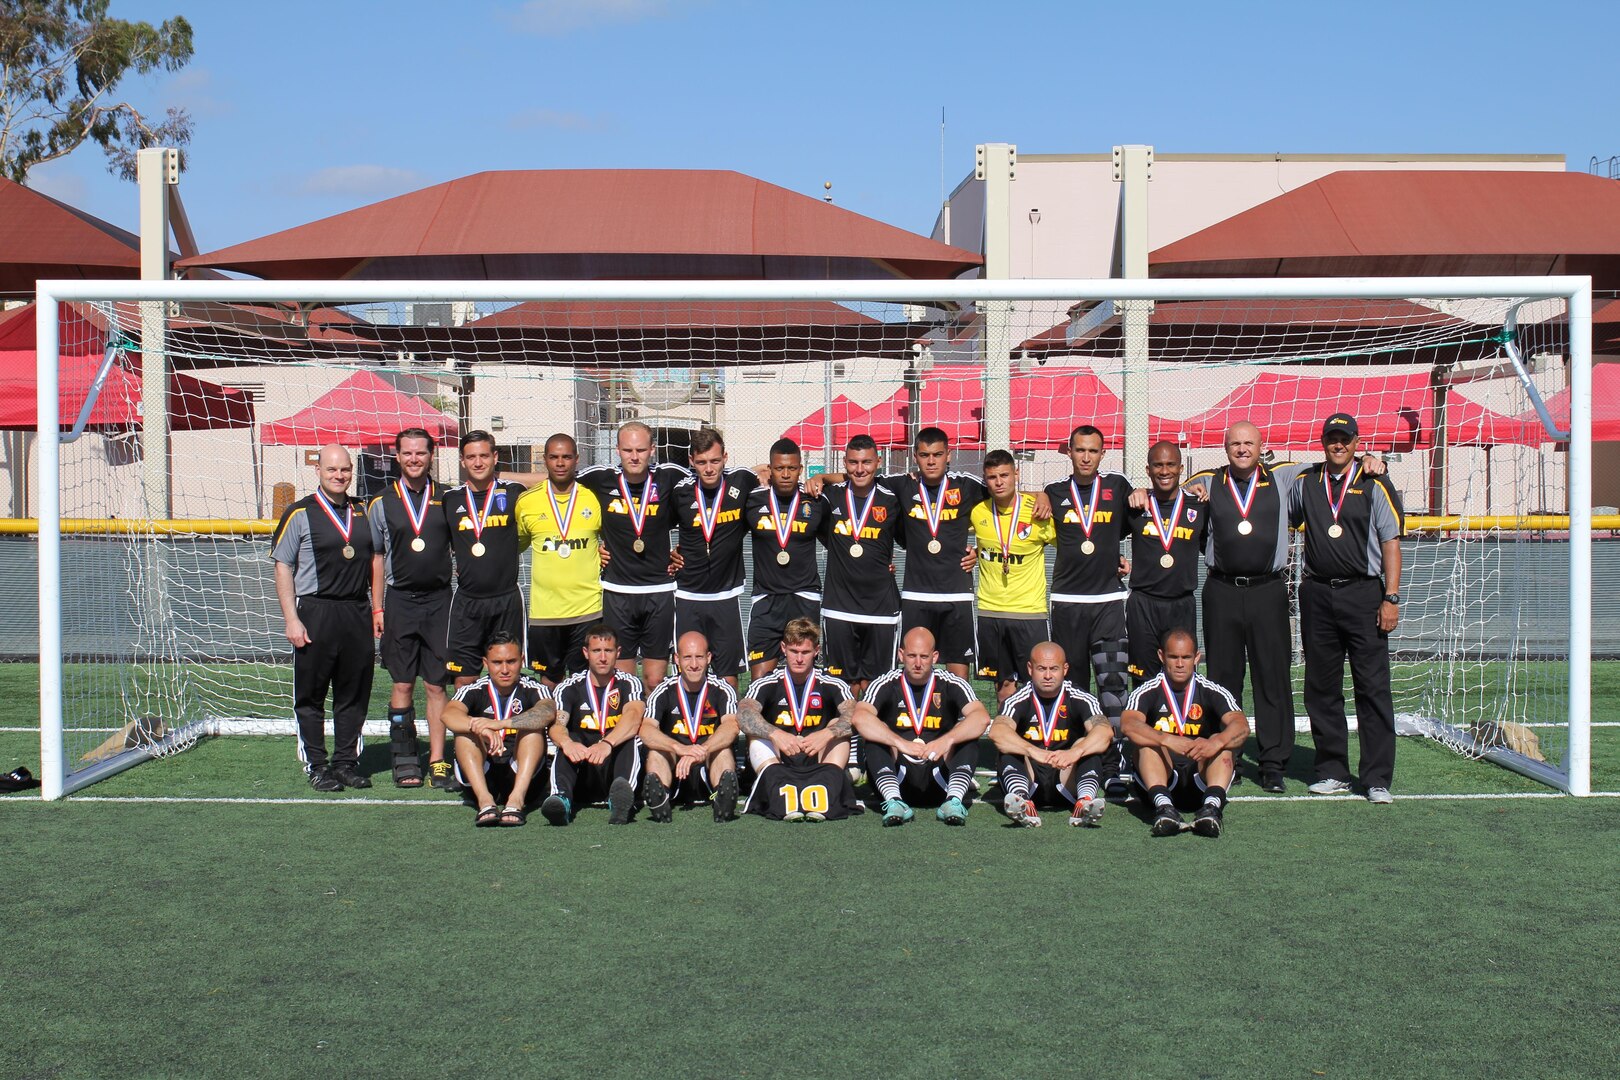 Army captures Armed Forces Soccer Gold held at MCAS Miramar, Calif. 12-21 May 2015.  